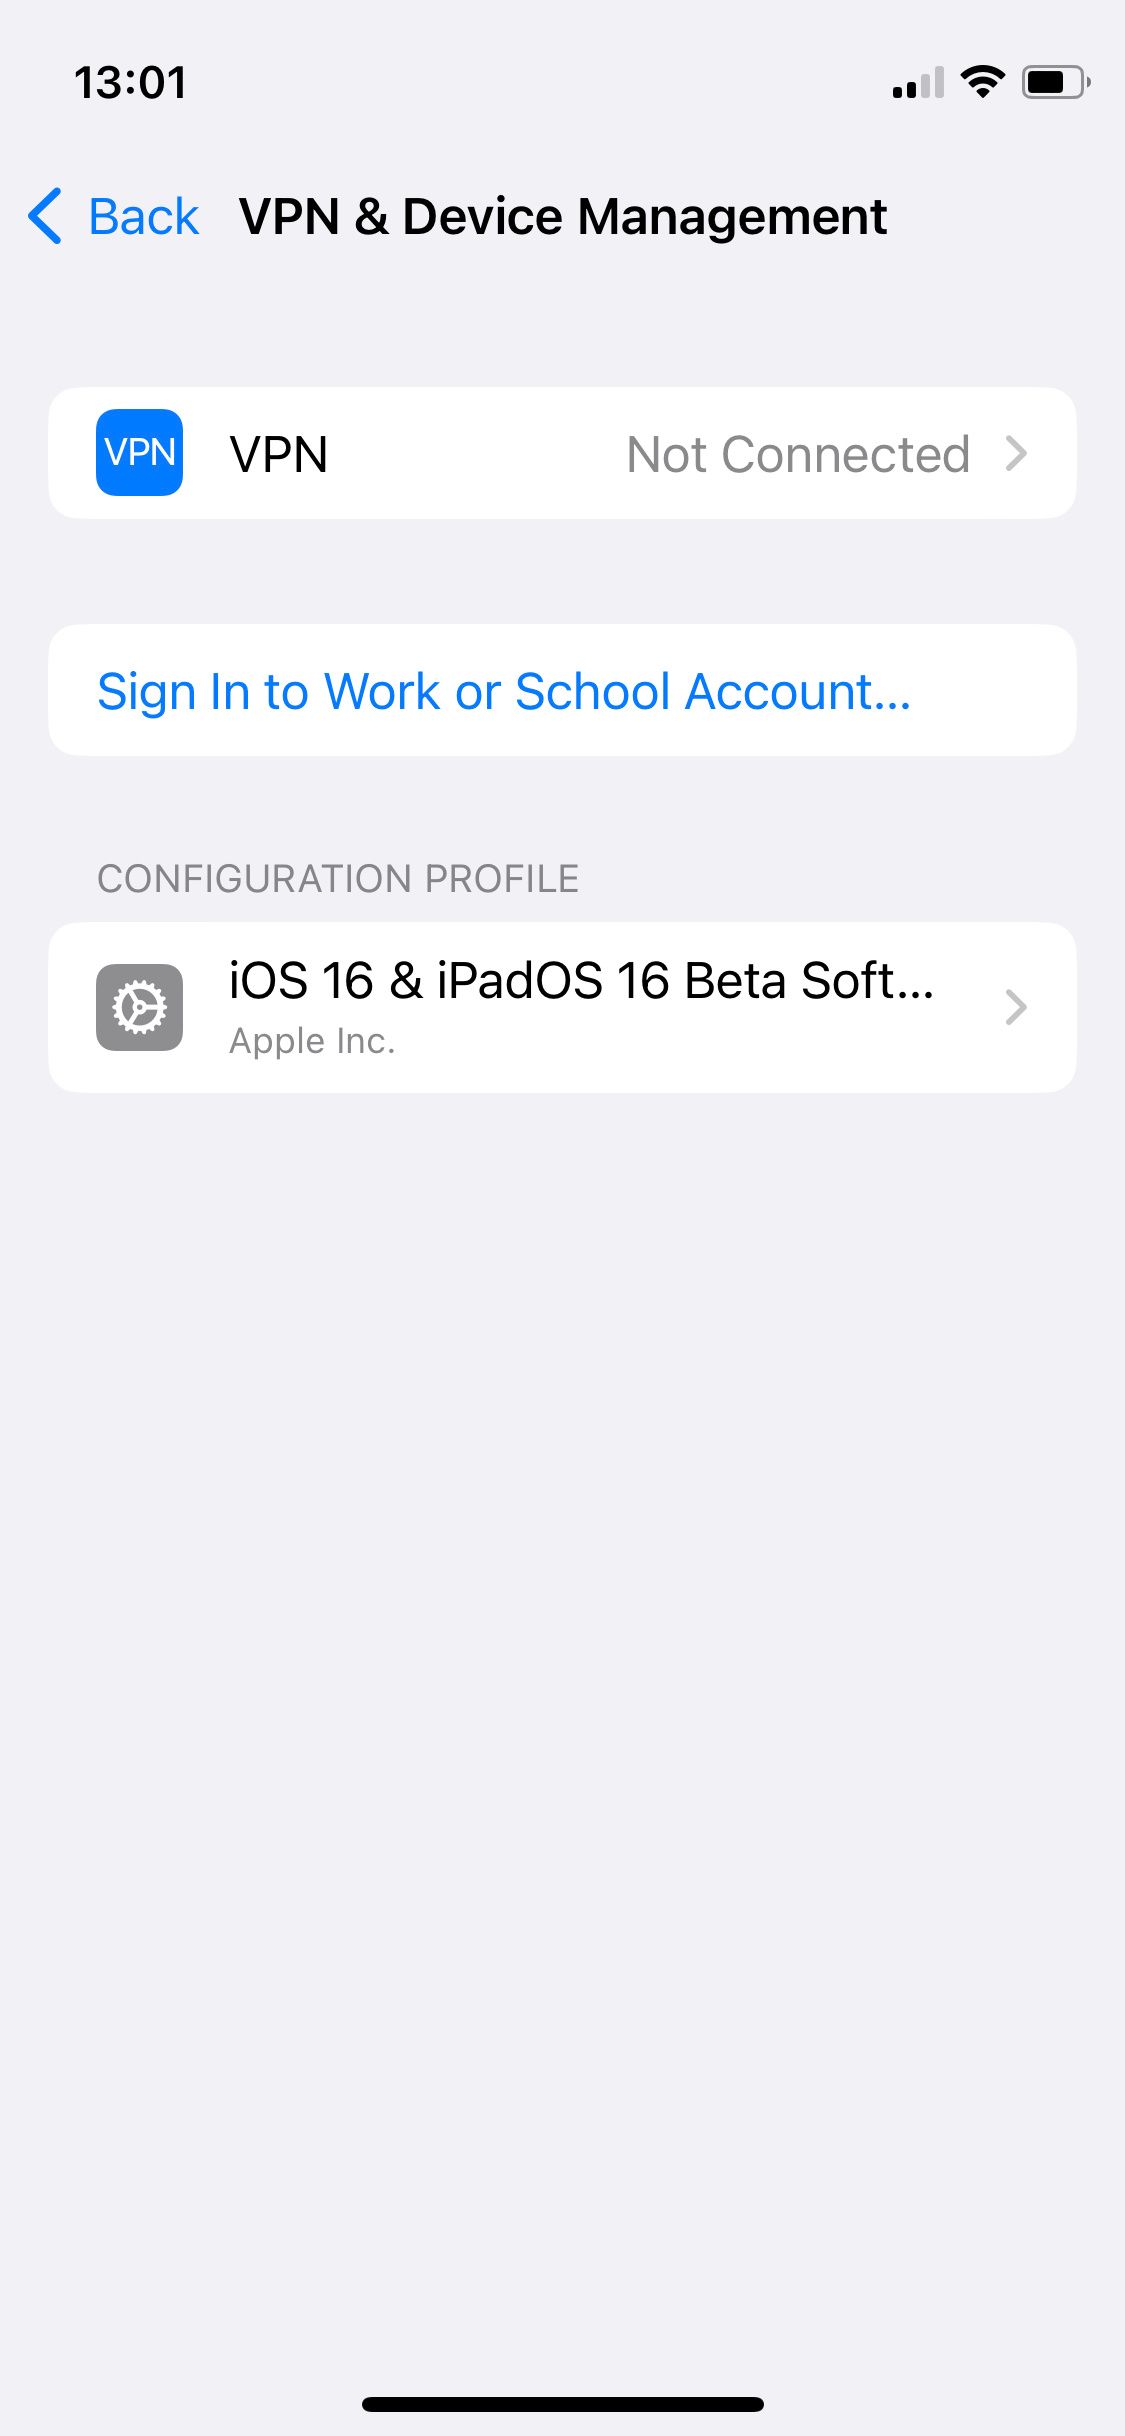 VPN and Device Management iPhone settings